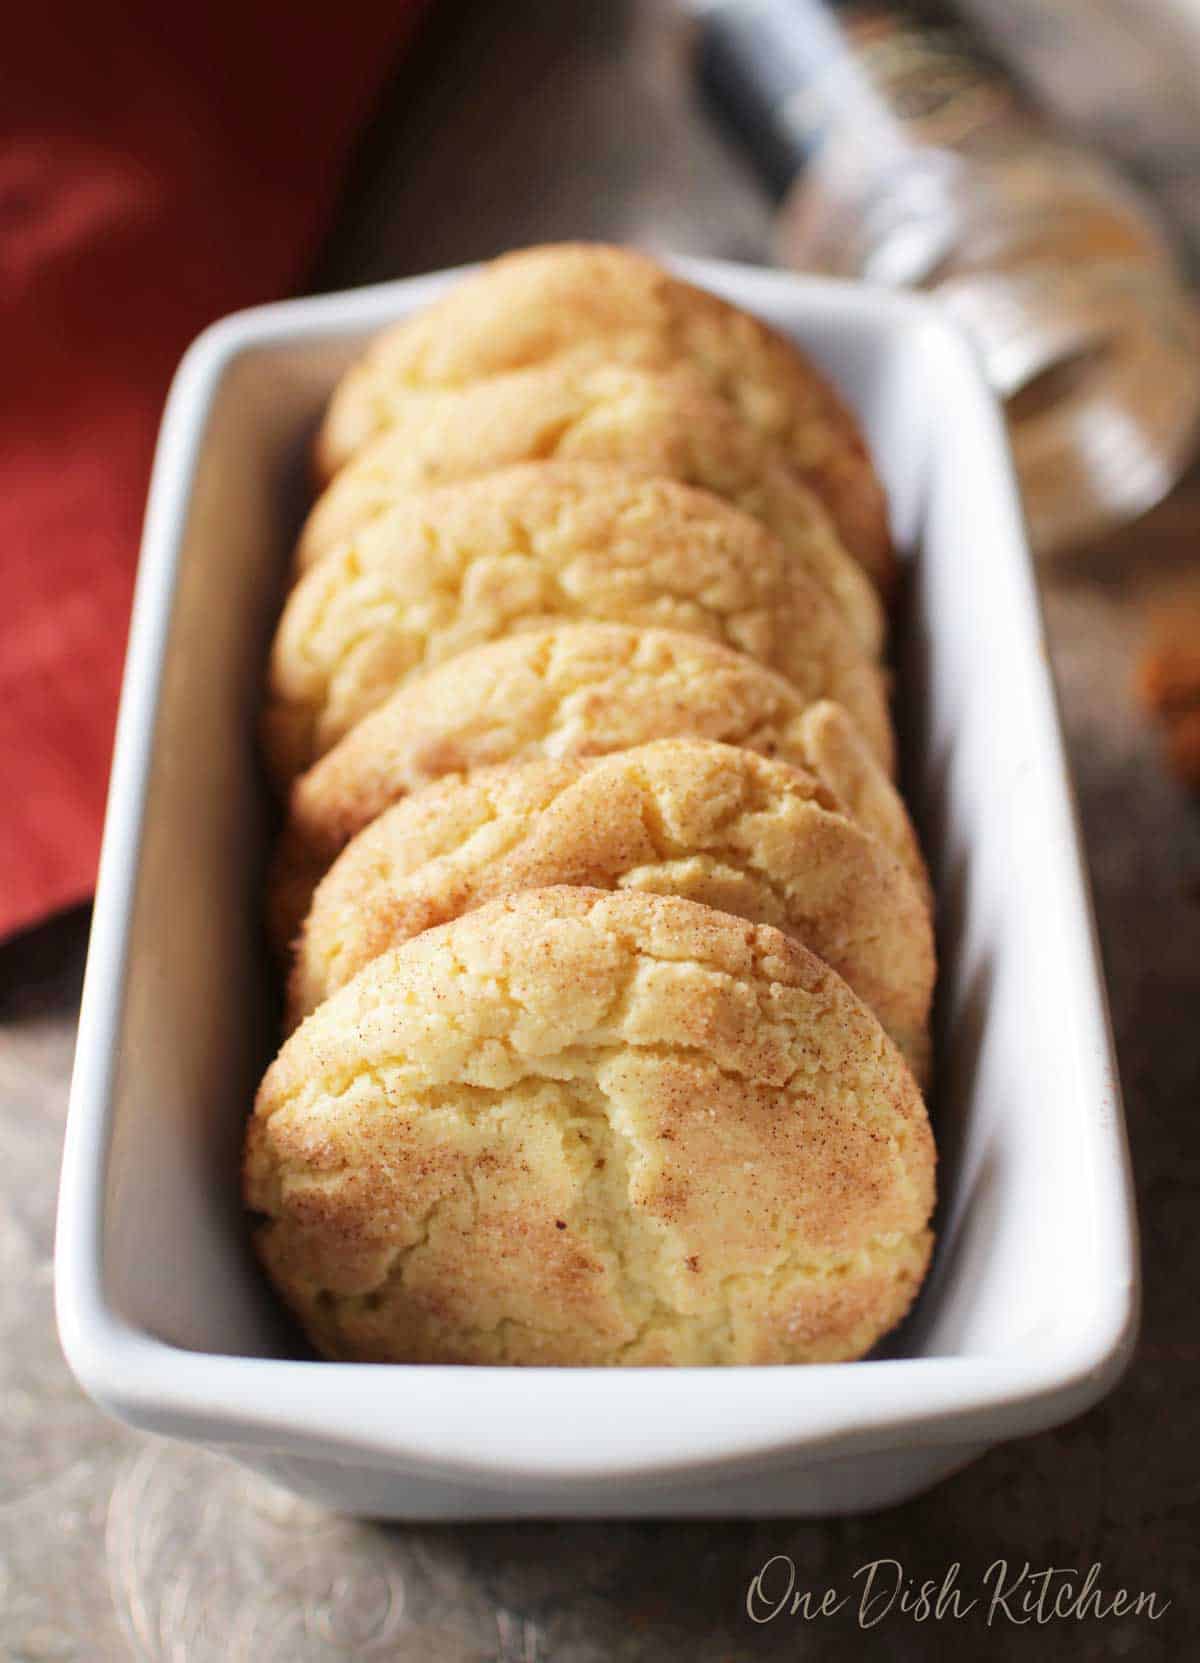 Six snickerdoodle cookies placed in a loaf pan.